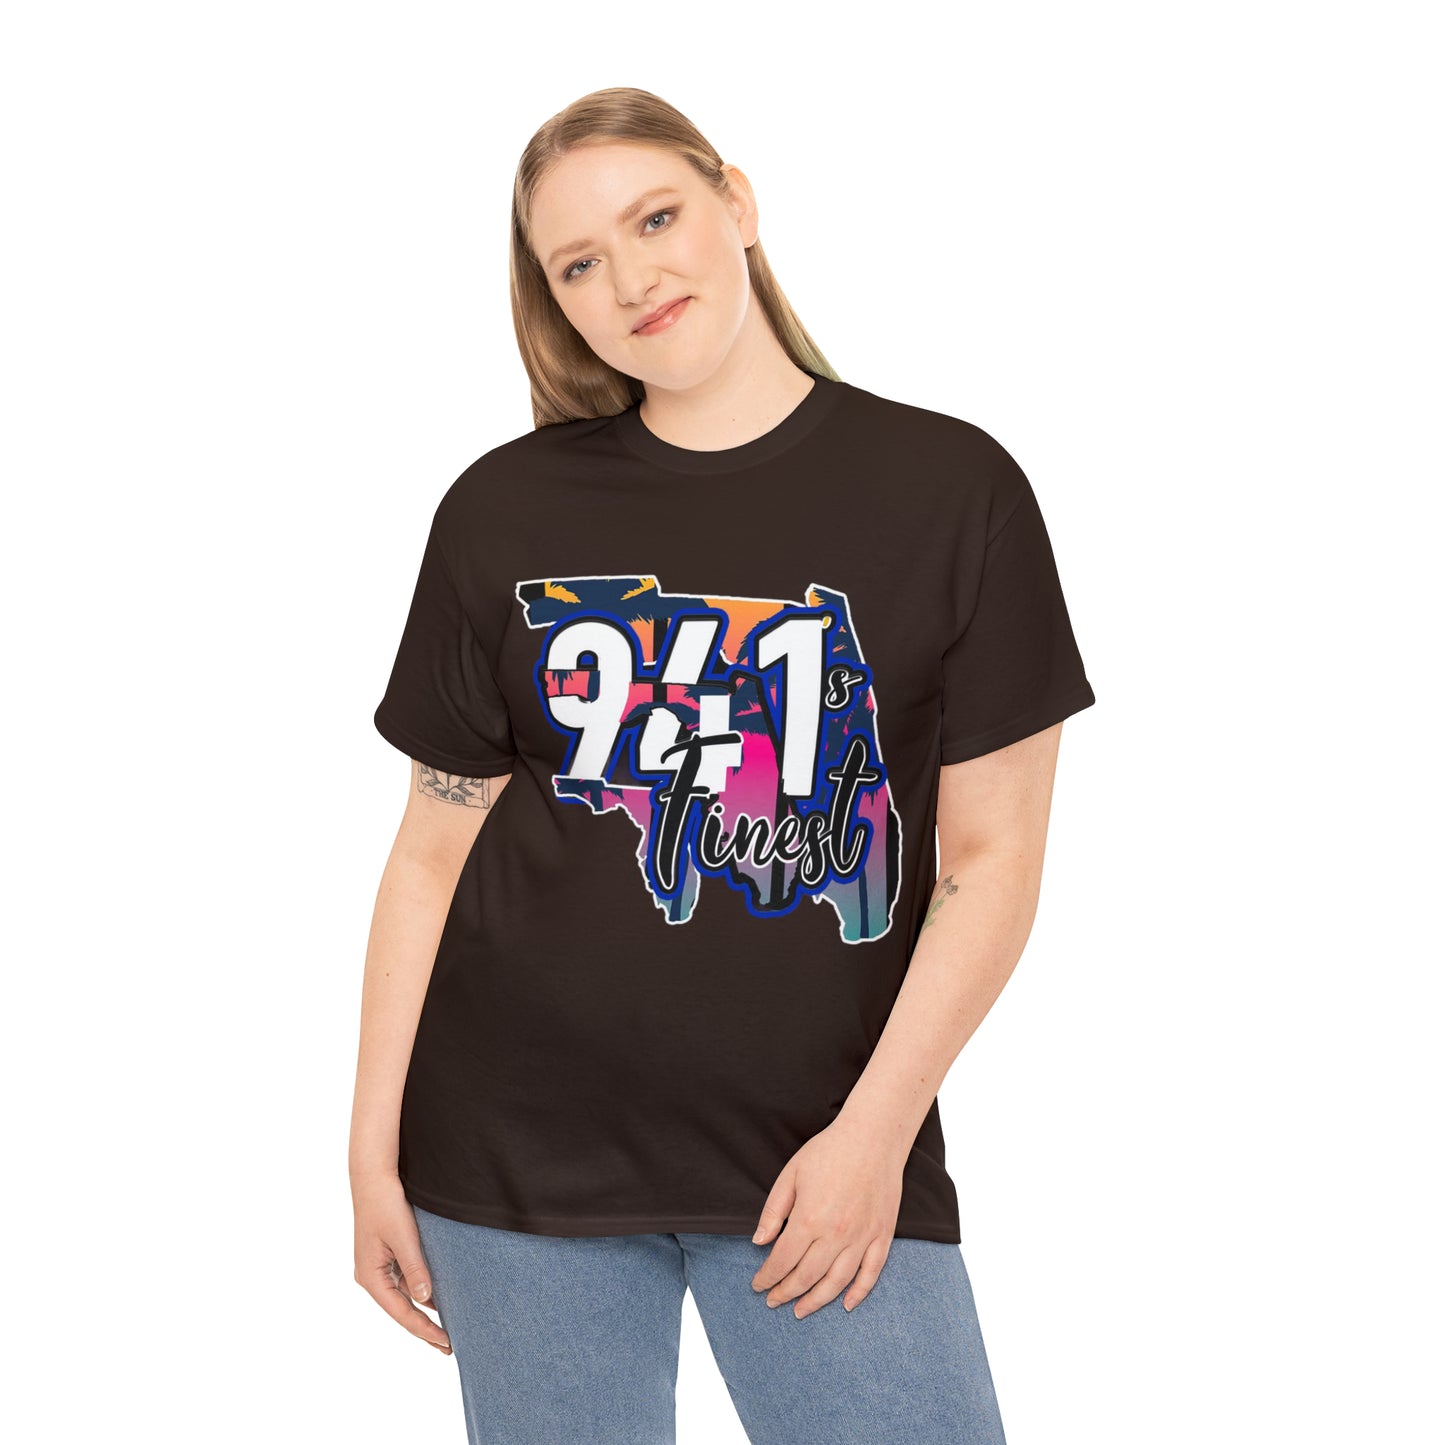 941’s Finest T-shirt (Palm Trees)